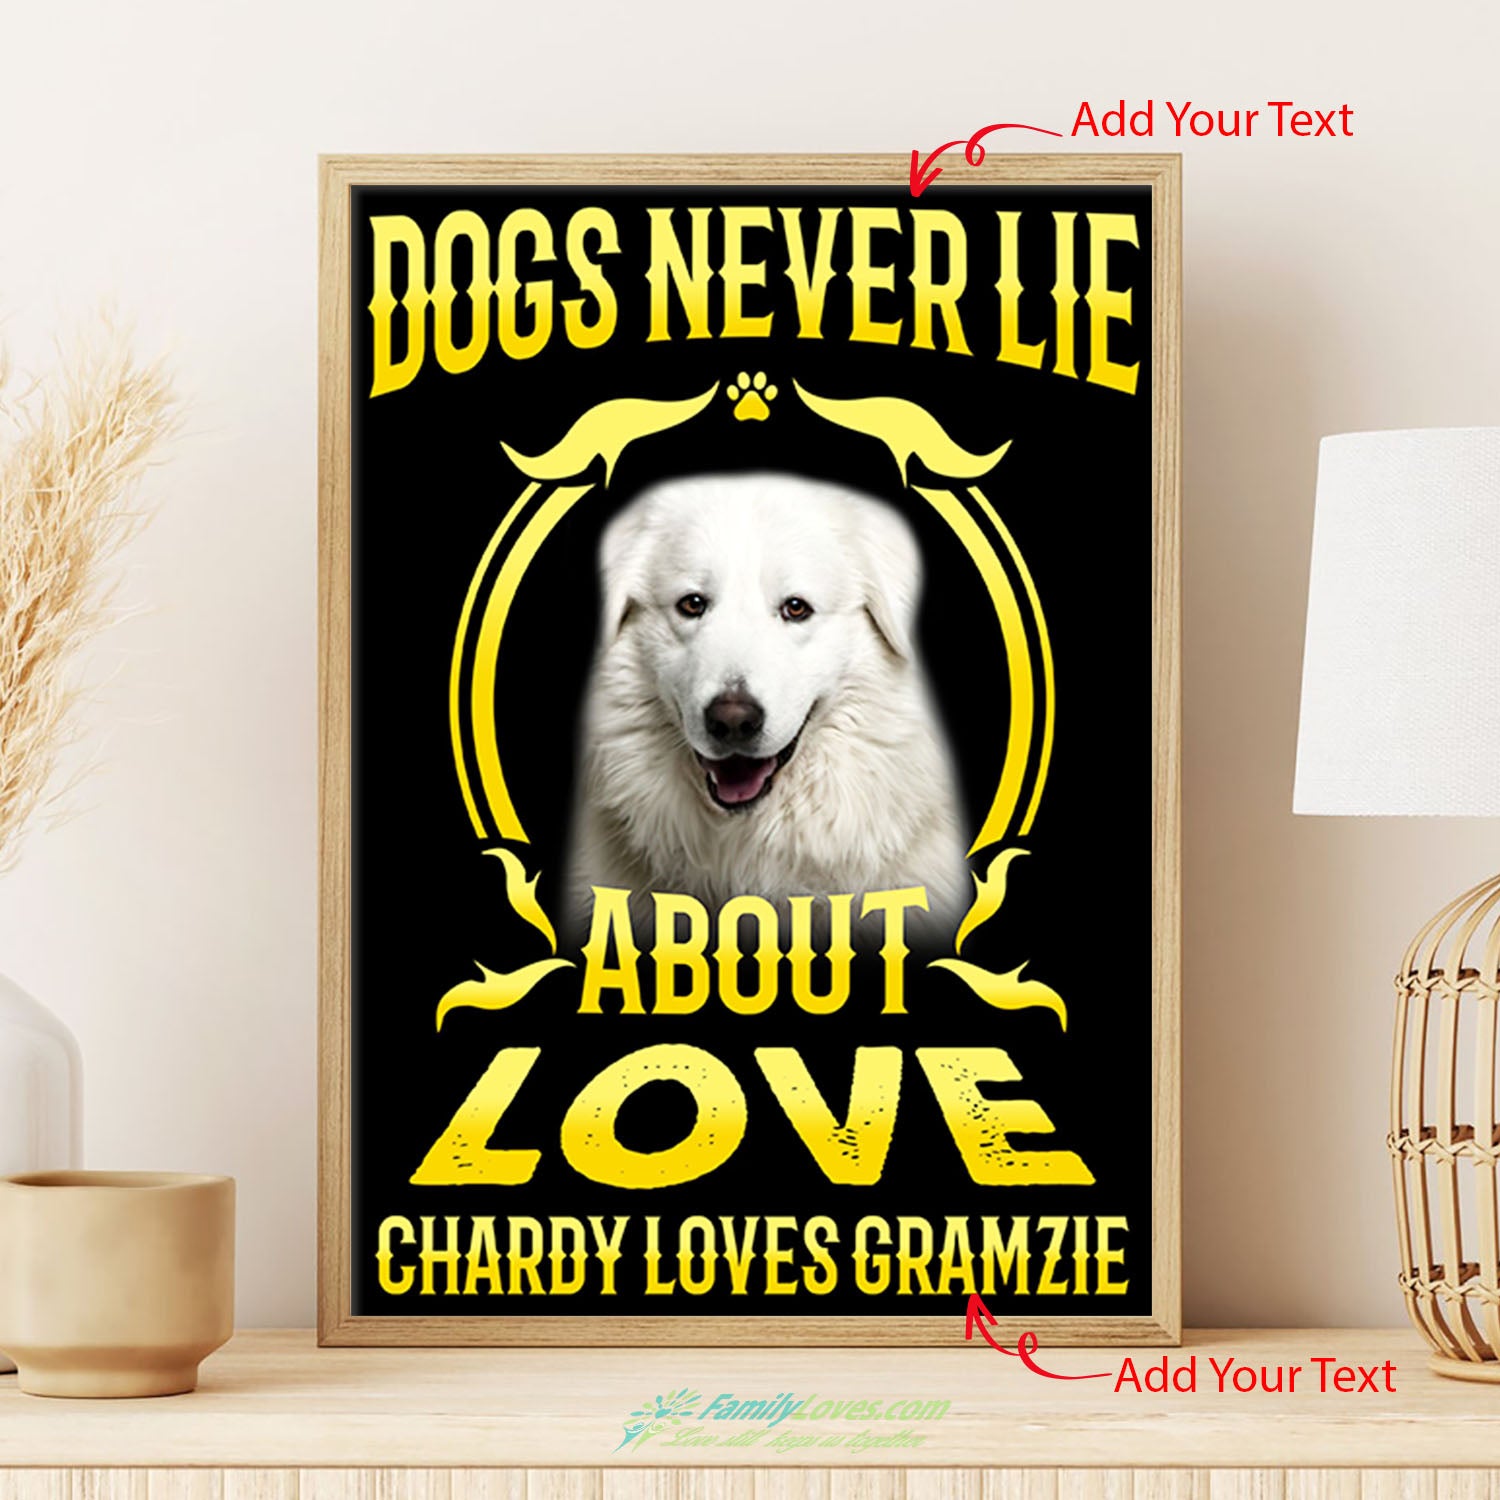 Dogs Never Lie About Love Chardy Loves Gramzie Canvas Hanger Poster Room Decor All Size 1